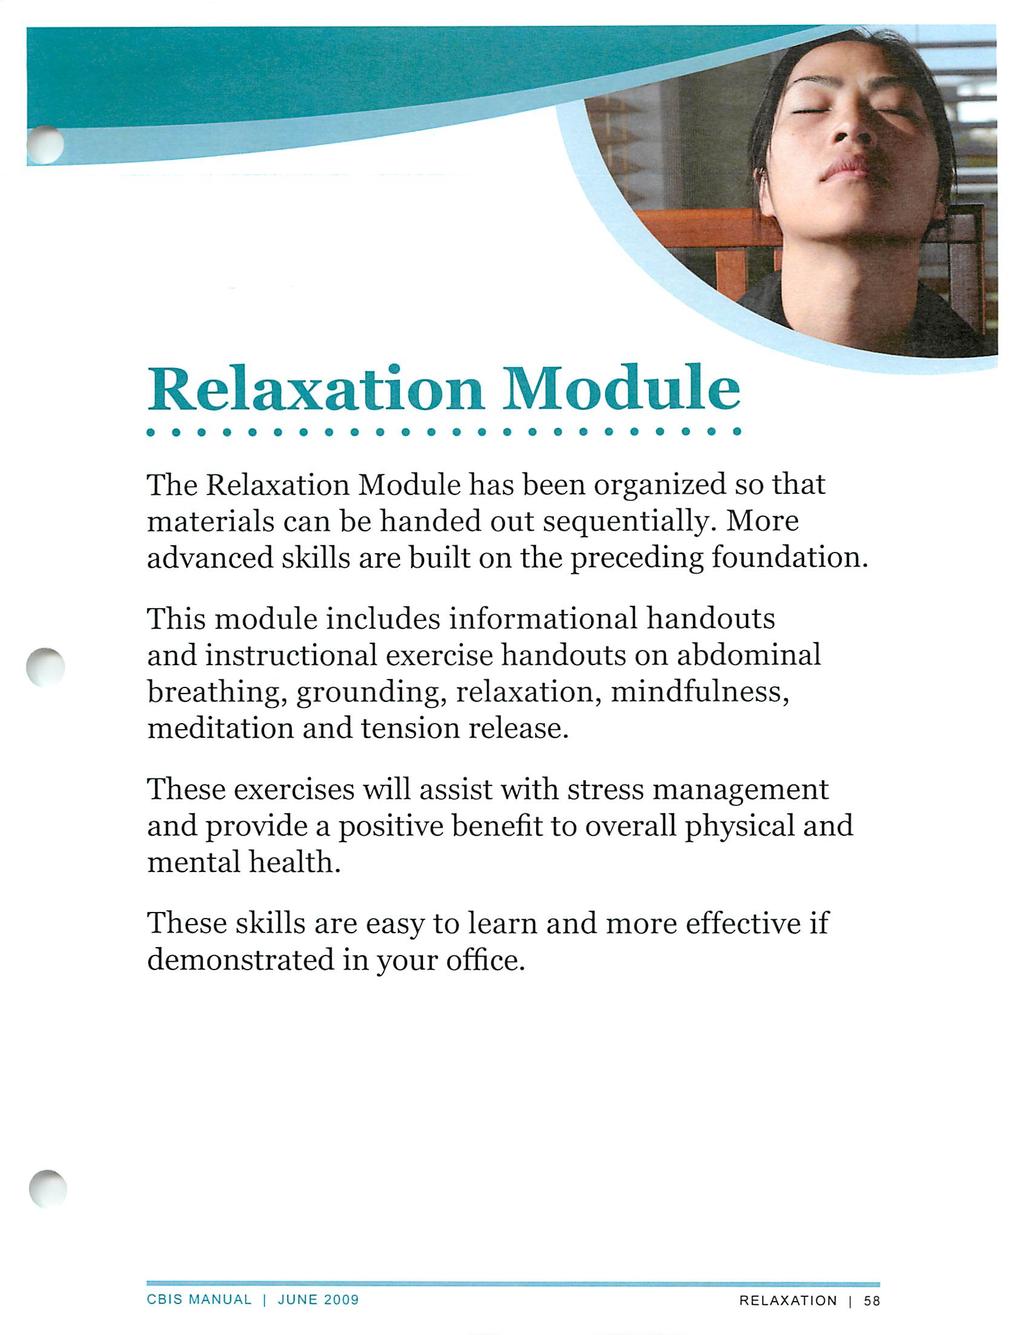 Relaxation Module The Relaxation Module has been organized so that materials can be handed out sequentially. More advanced skills are built on the preceding foundation.